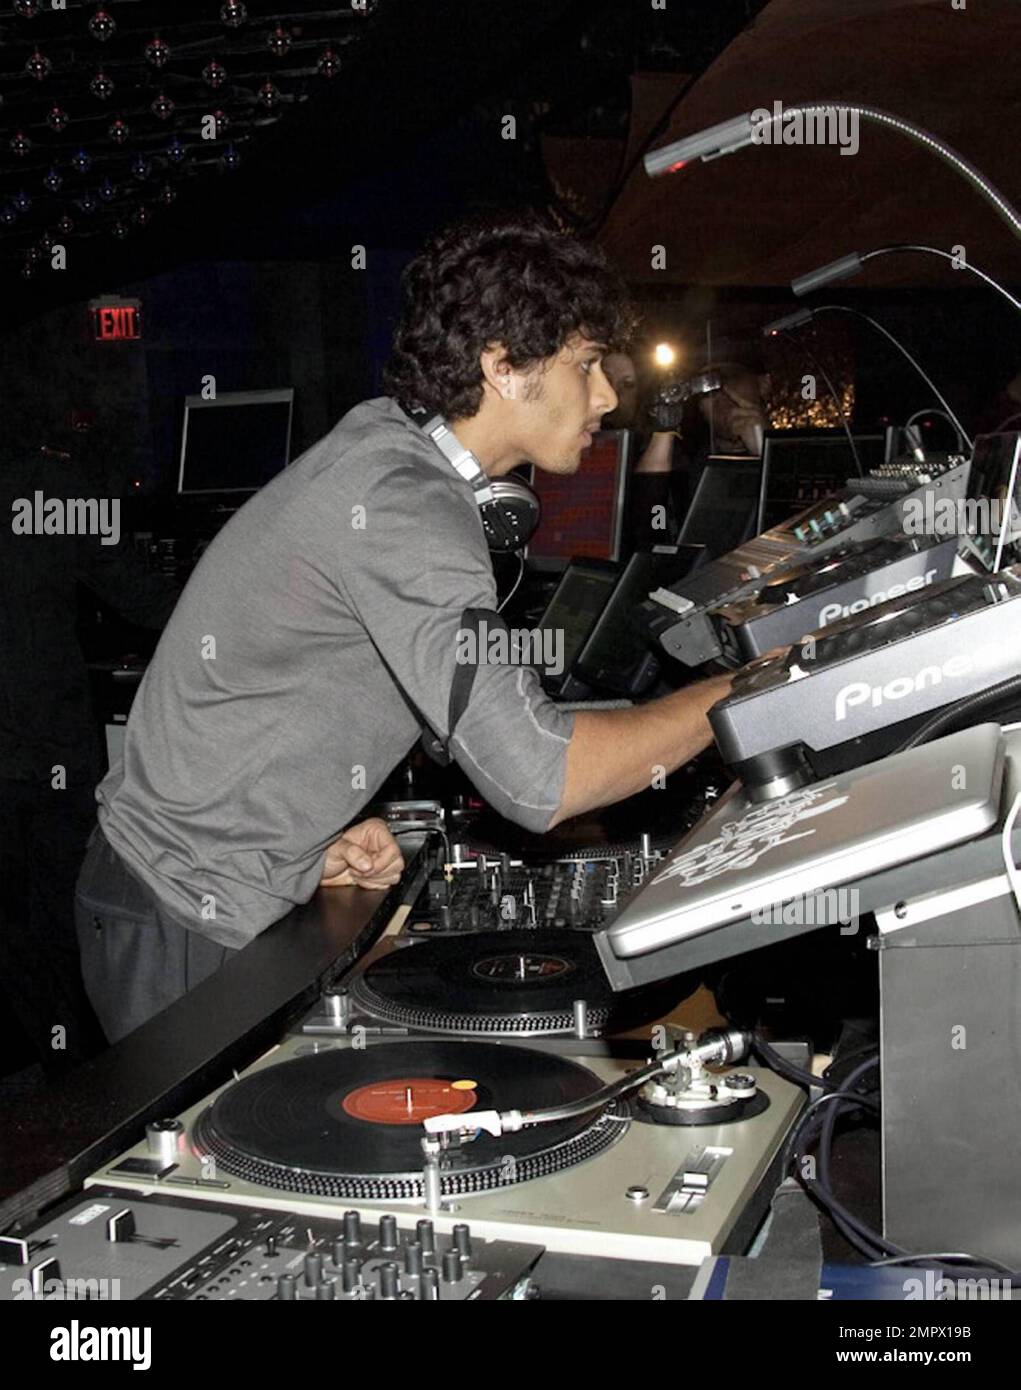 Madonna's boyfriend and up-and-coming DJ, Jesus Luz spins at Dusk nightclub  inside Caesars Atlantic City as part of his first US tour. It's reported  that Madonna spent thousands on DJ equipment for